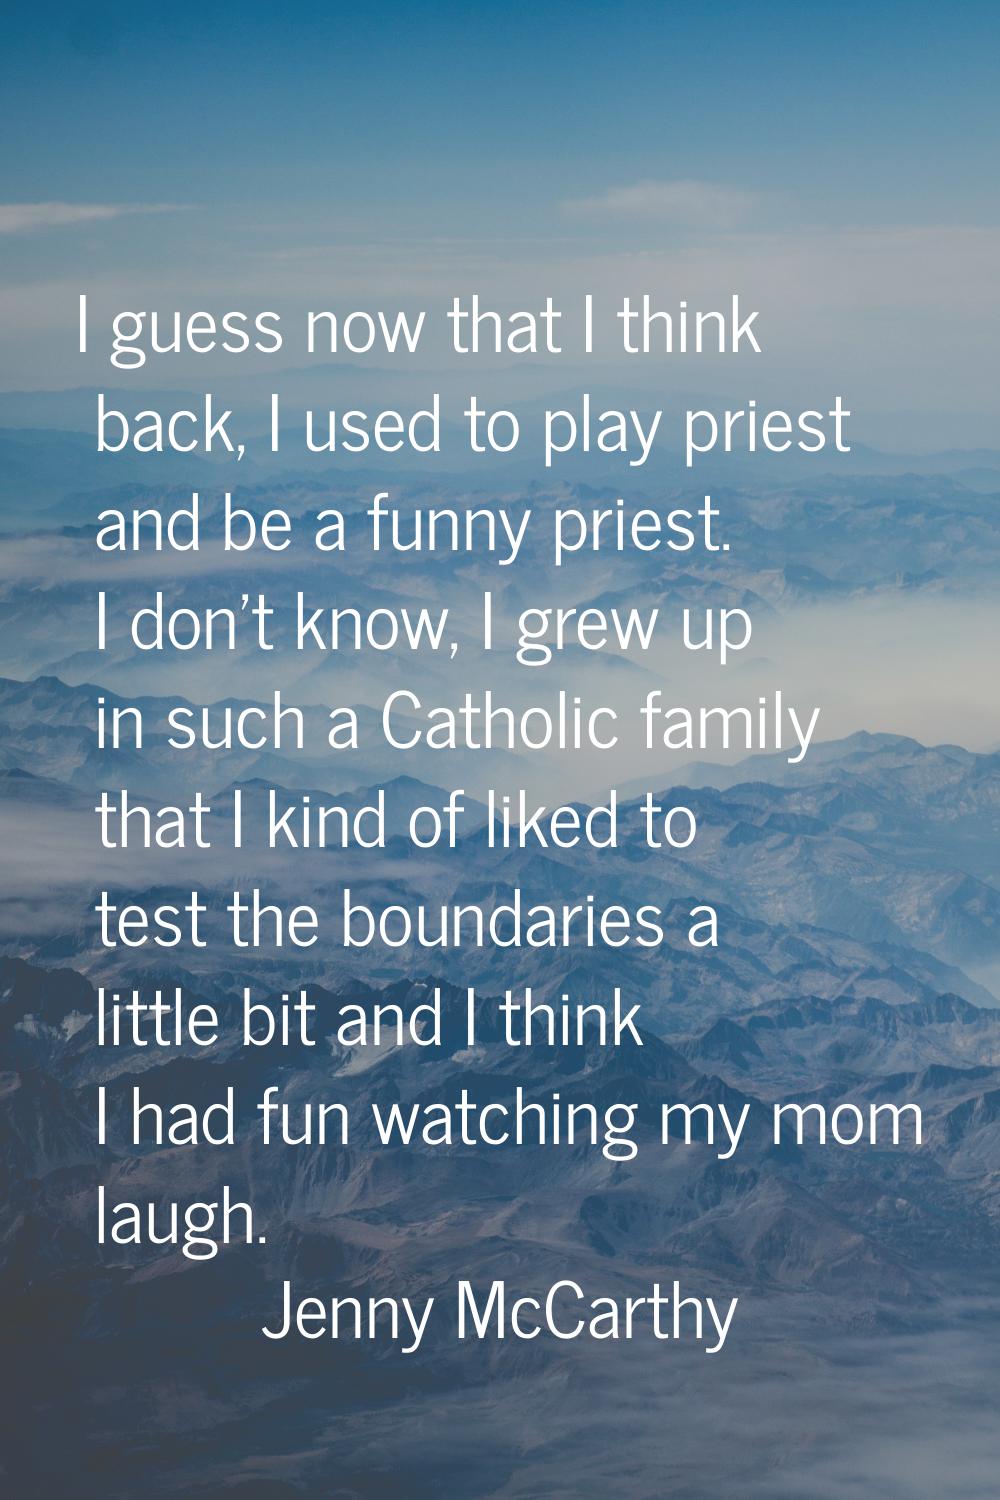 I guess now that I think back, I used to play priest and be a funny priest. I don't know, I grew up